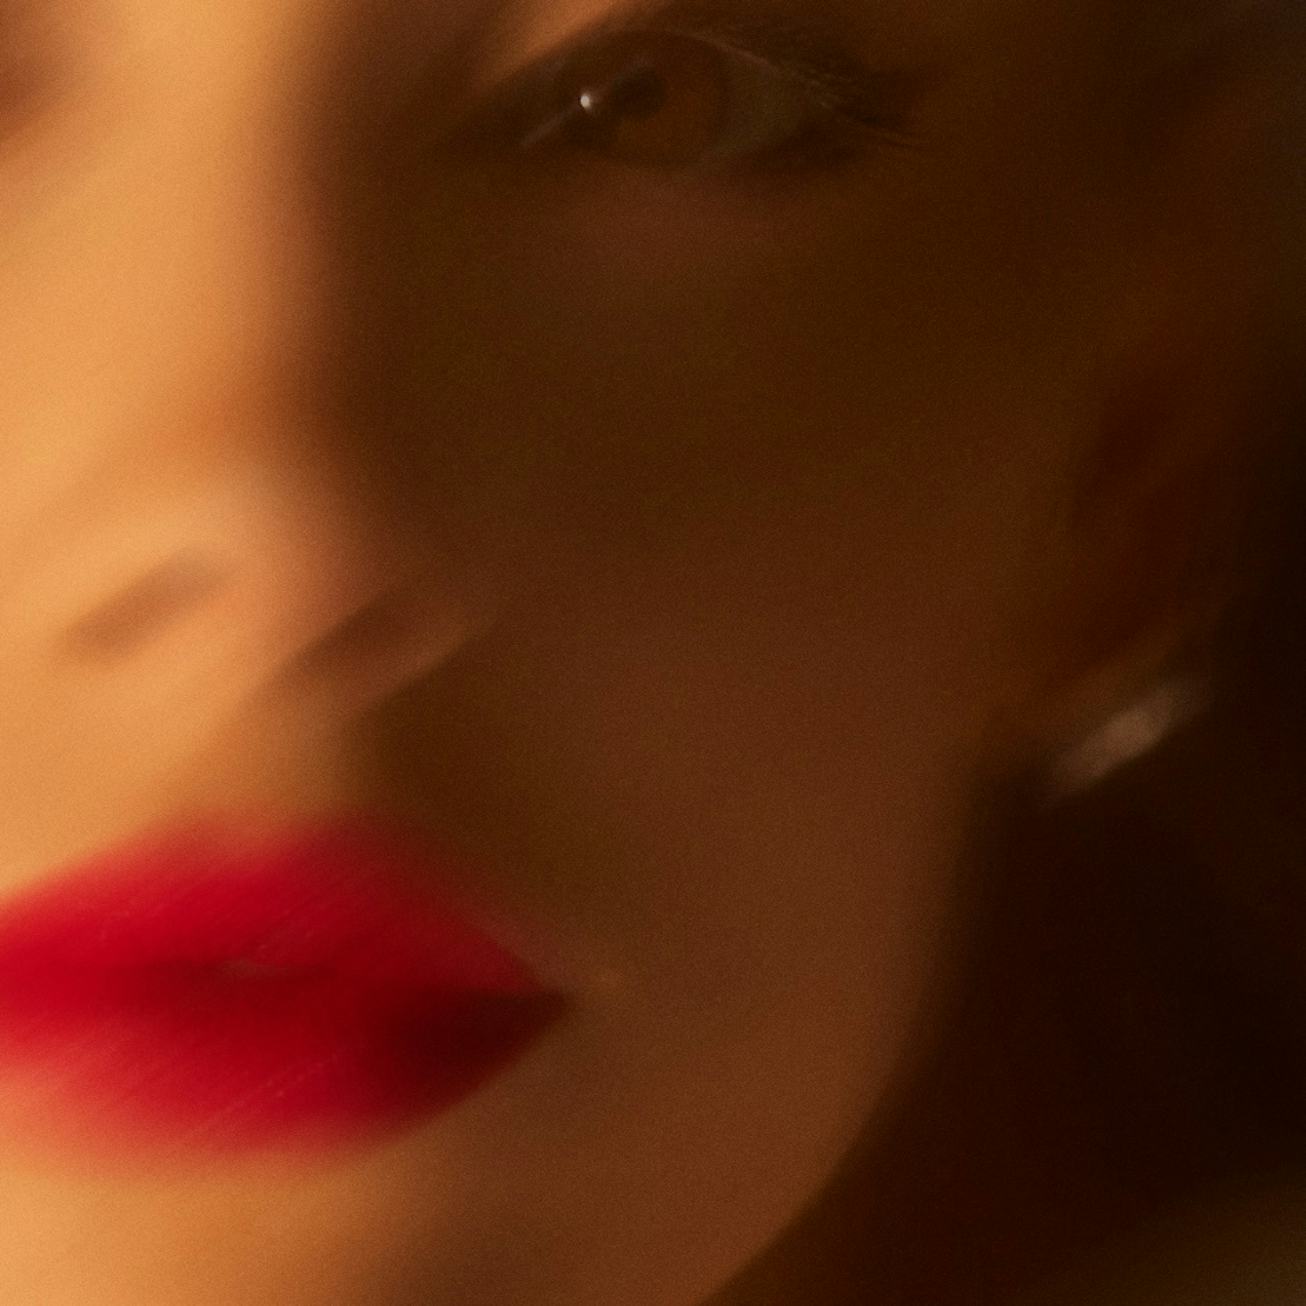 Close-up of a woman's face focused on her red lips and the side of her nose, with soft lighting and ...